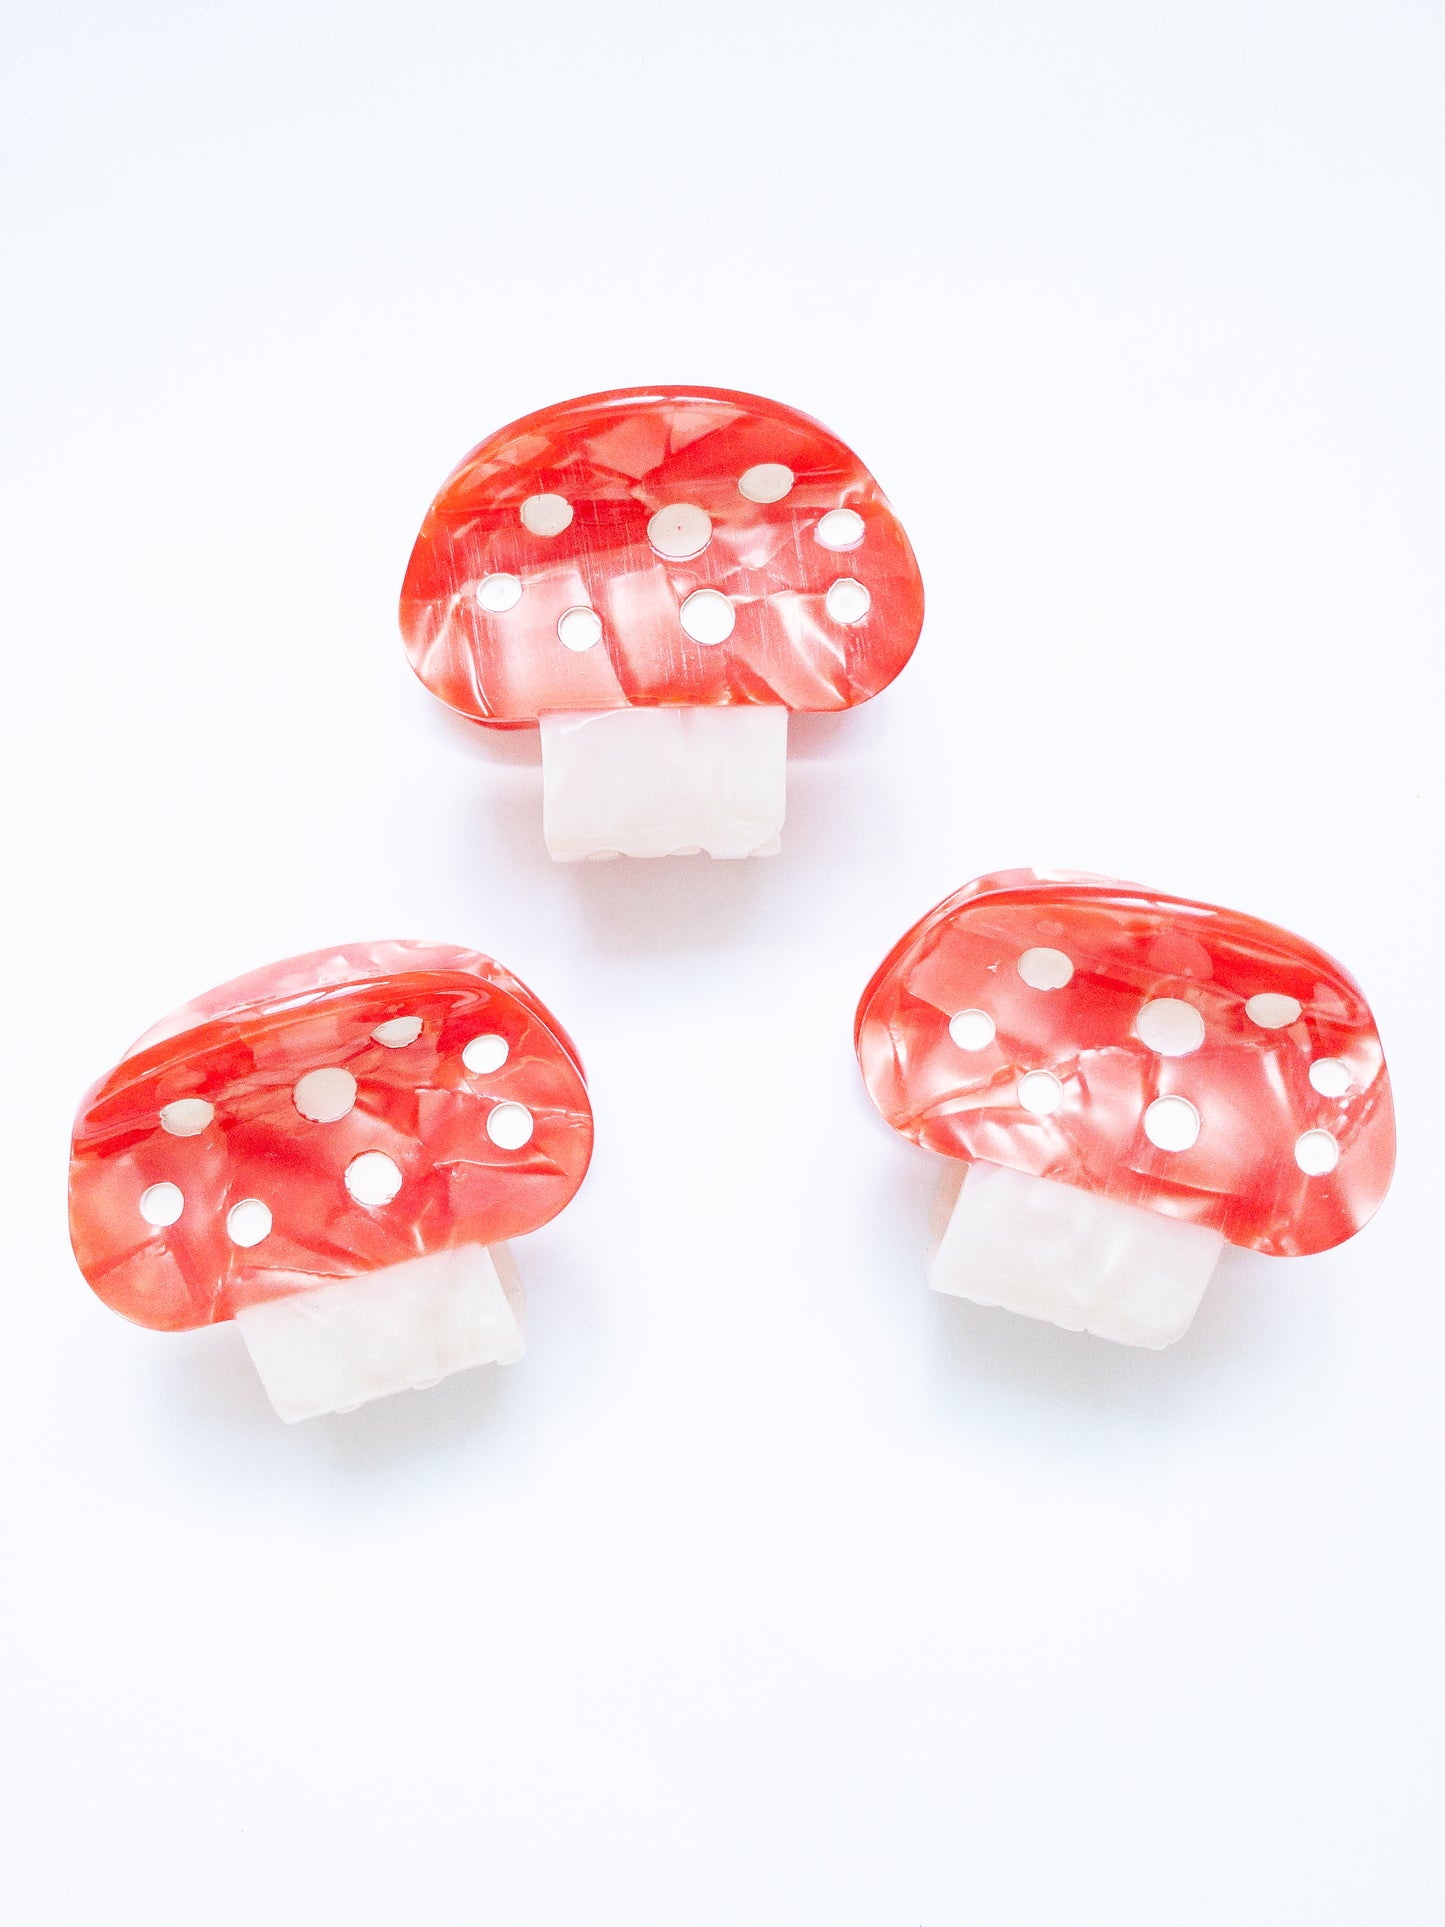 Gorgeous acetate mushroom hair claw clip! These claw clips are a medium size, great for half up hairstyles. Grab one in a pretty, speckled light orange or red.